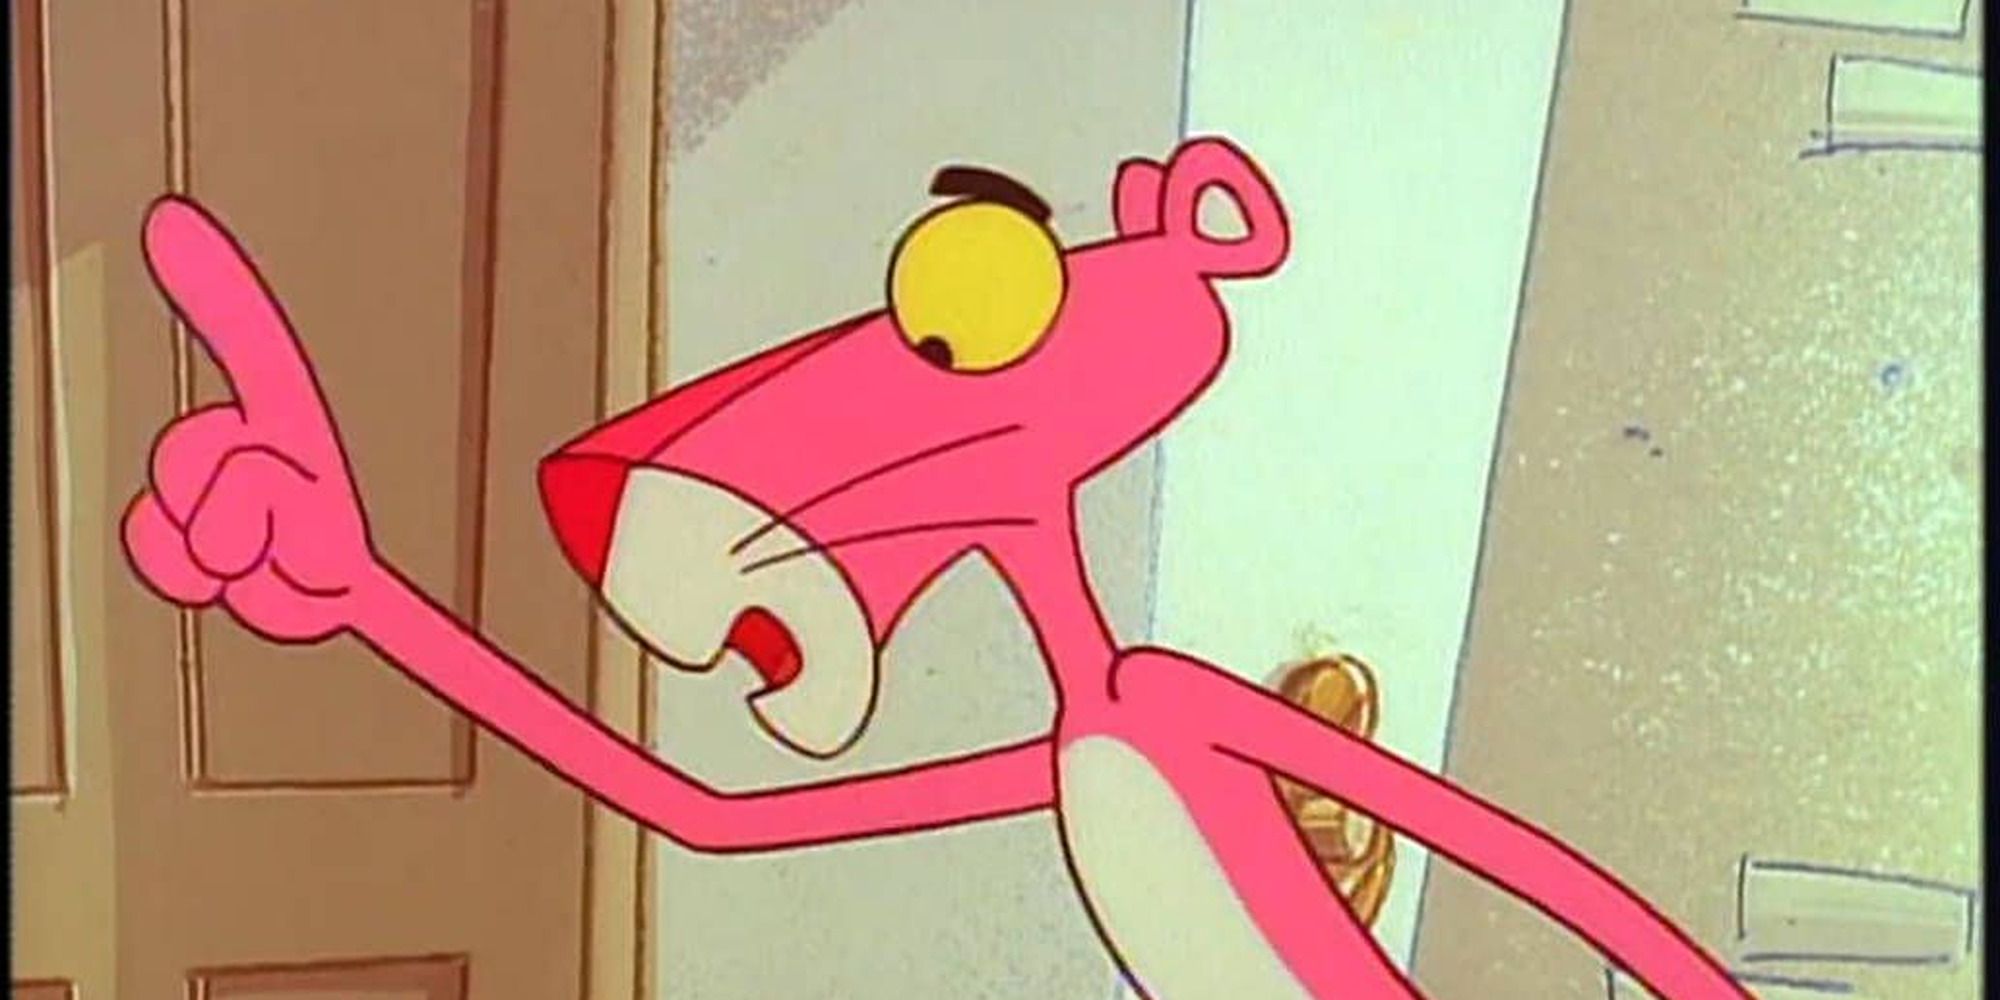 The pink panther is pointing the finger at someone on the left